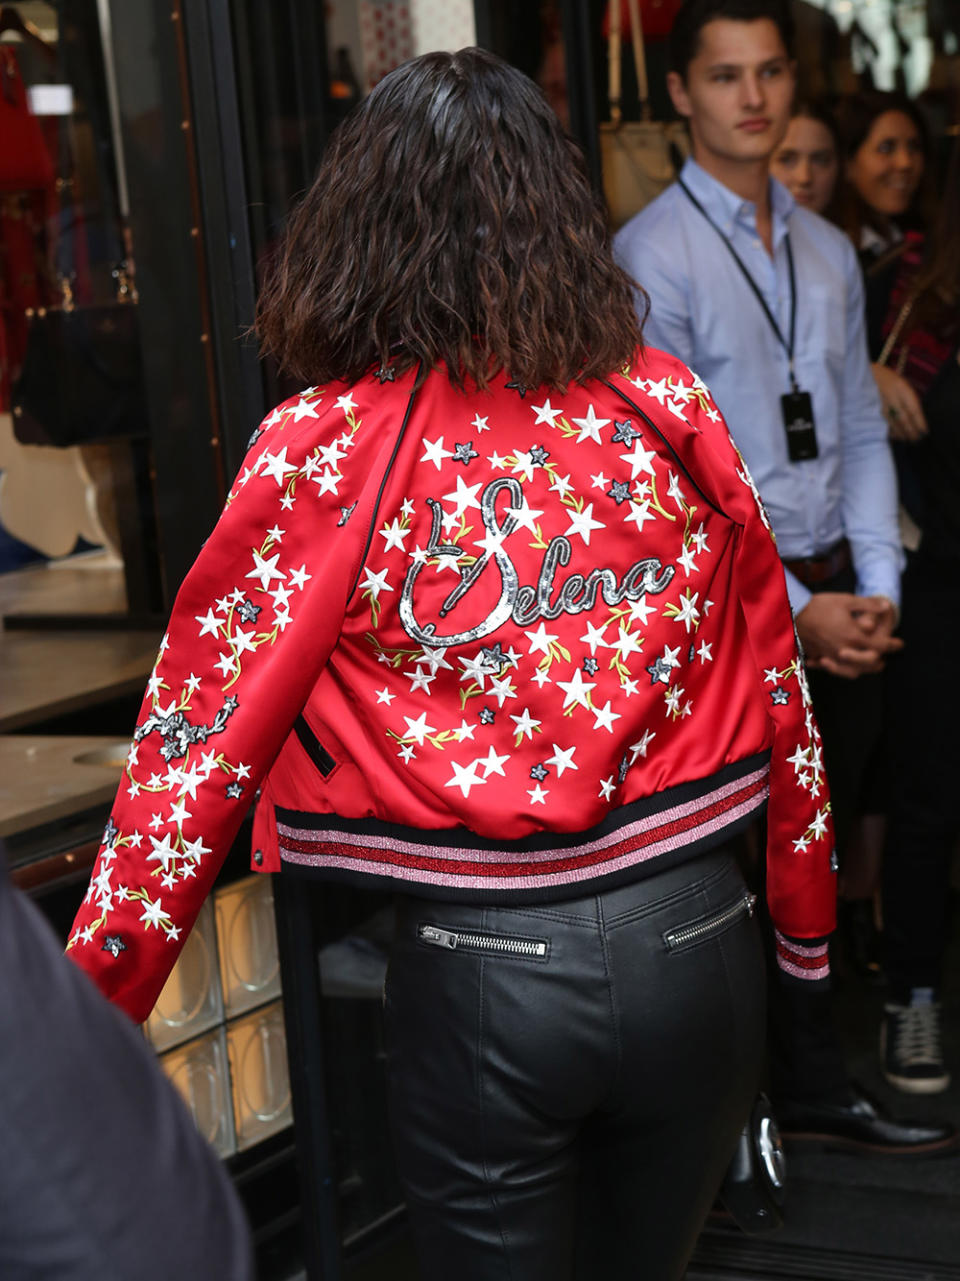 <p>The back of the jacket features customized embroidery, reading “Selena” in sequins. (Photo: Splash) </p>